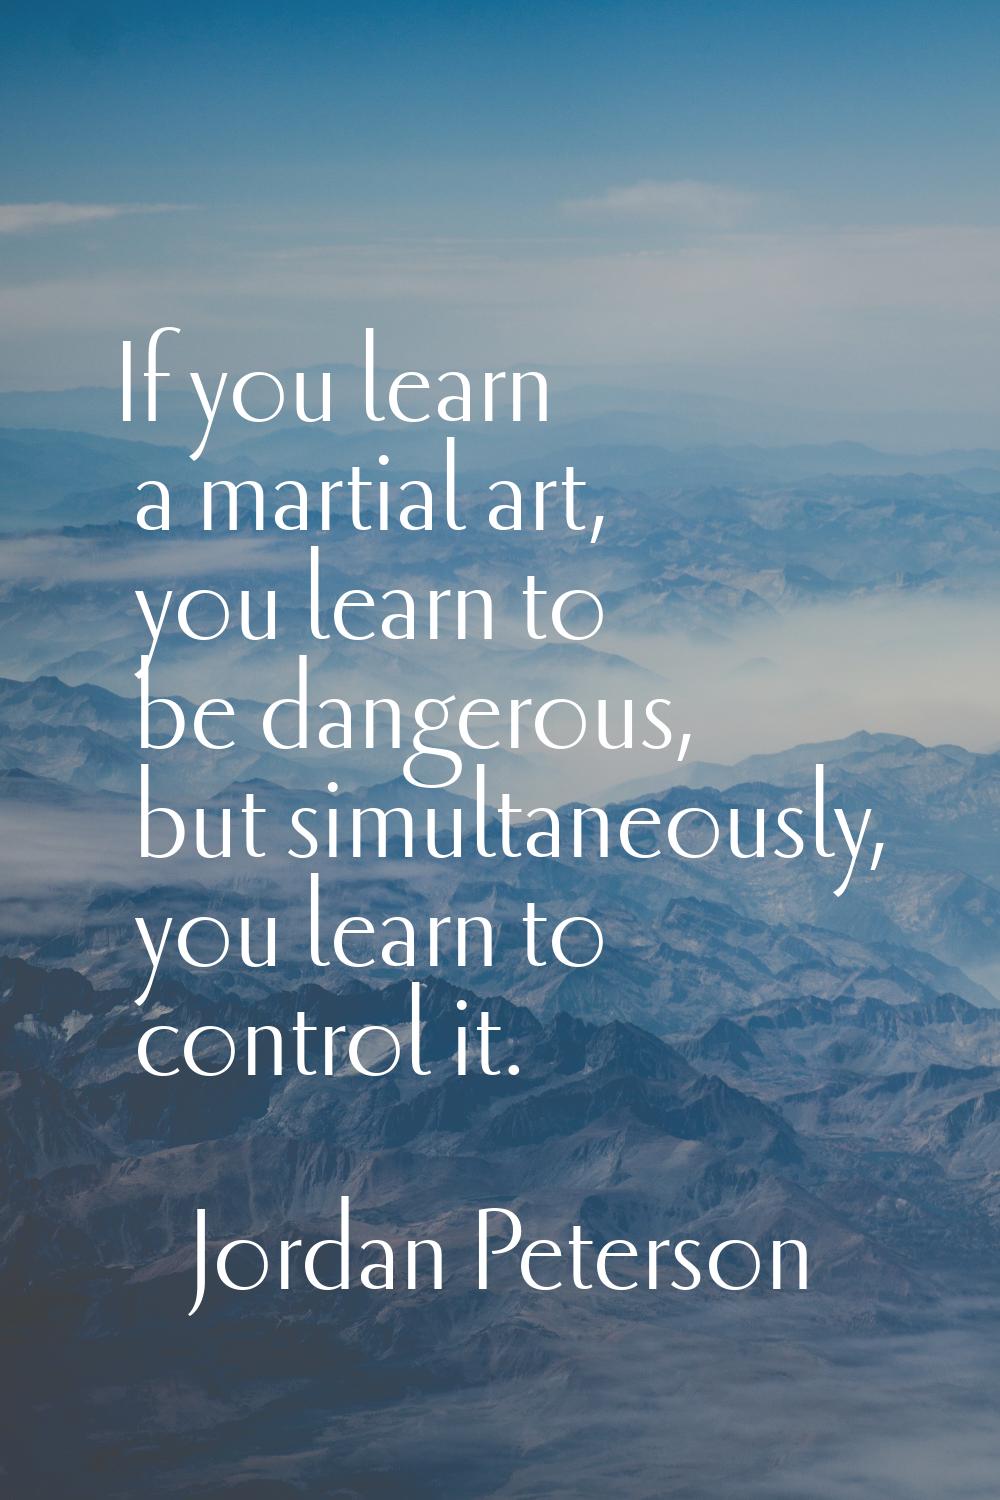 If you learn a martial art, you learn to be dangerous, but simultaneously, you learn to control it.